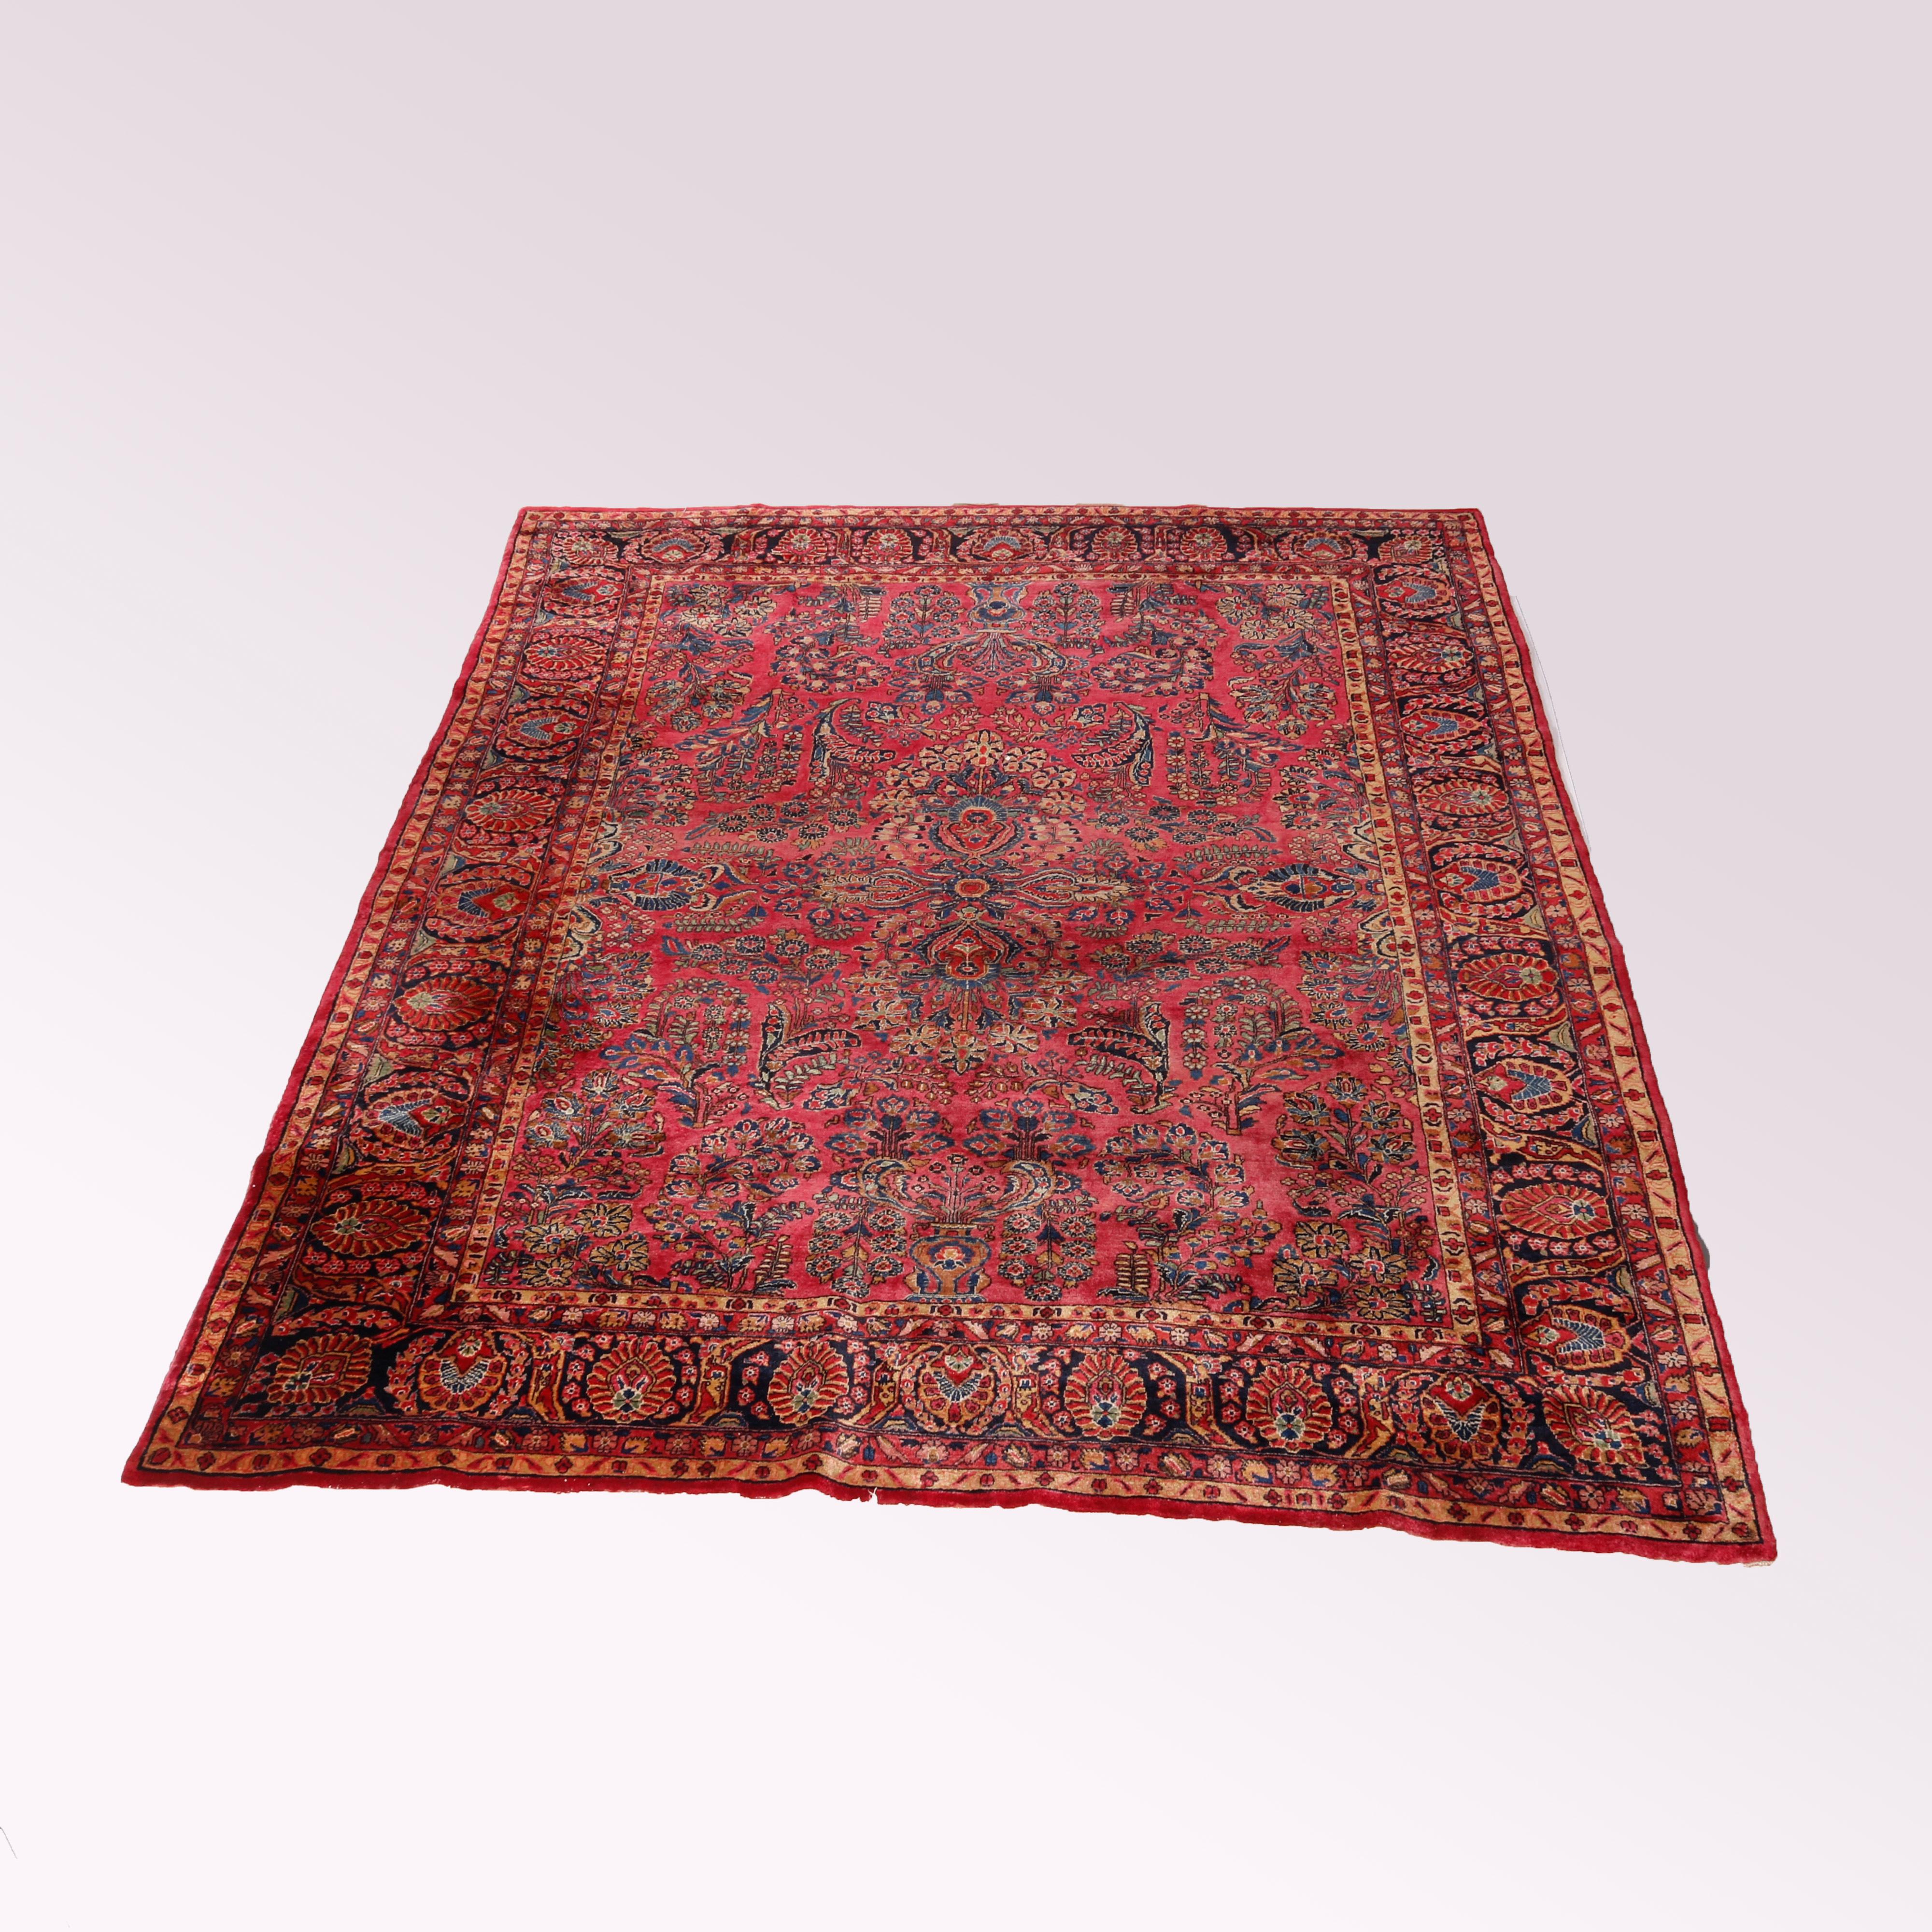 An antique Persian Sarouk oriental large carpet offers wool construction with floral and foliate pattern on red ground, c1930

Measures - 136''L x 102''W x .5''D.

Catalogue Note: Ask about DISCOUNTED DELIVERY RATES available to most regions within